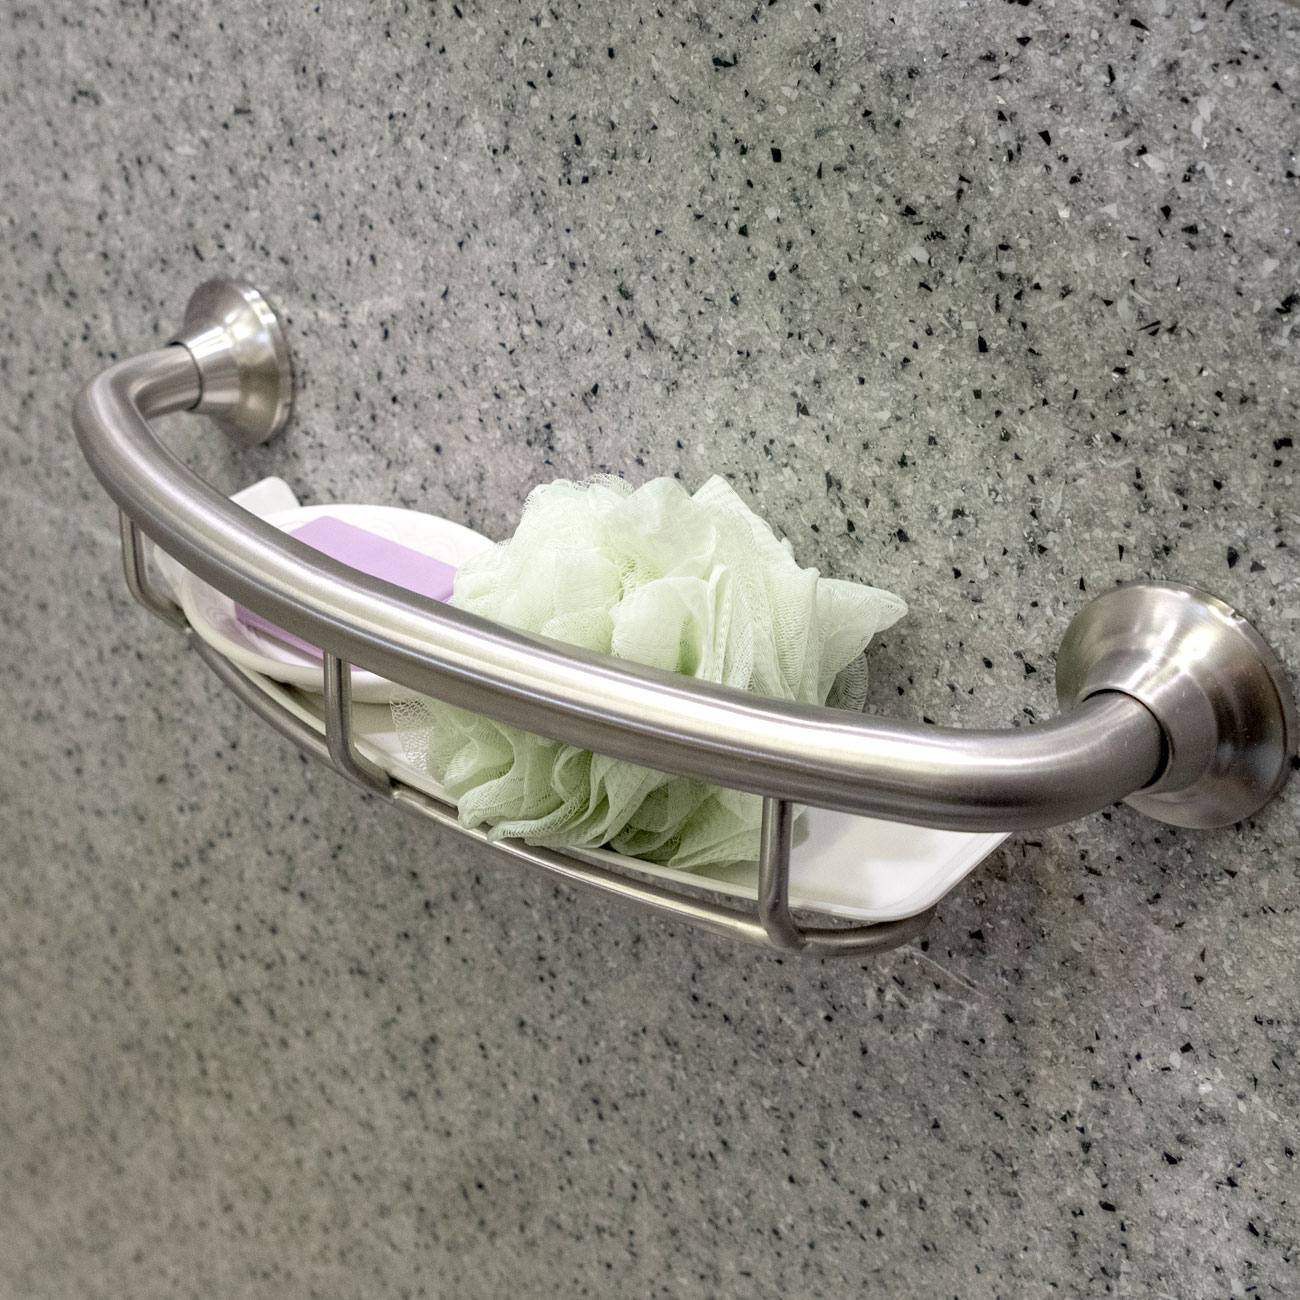 a Leaf Home Safety Solutions Grab Bar to protect against falls